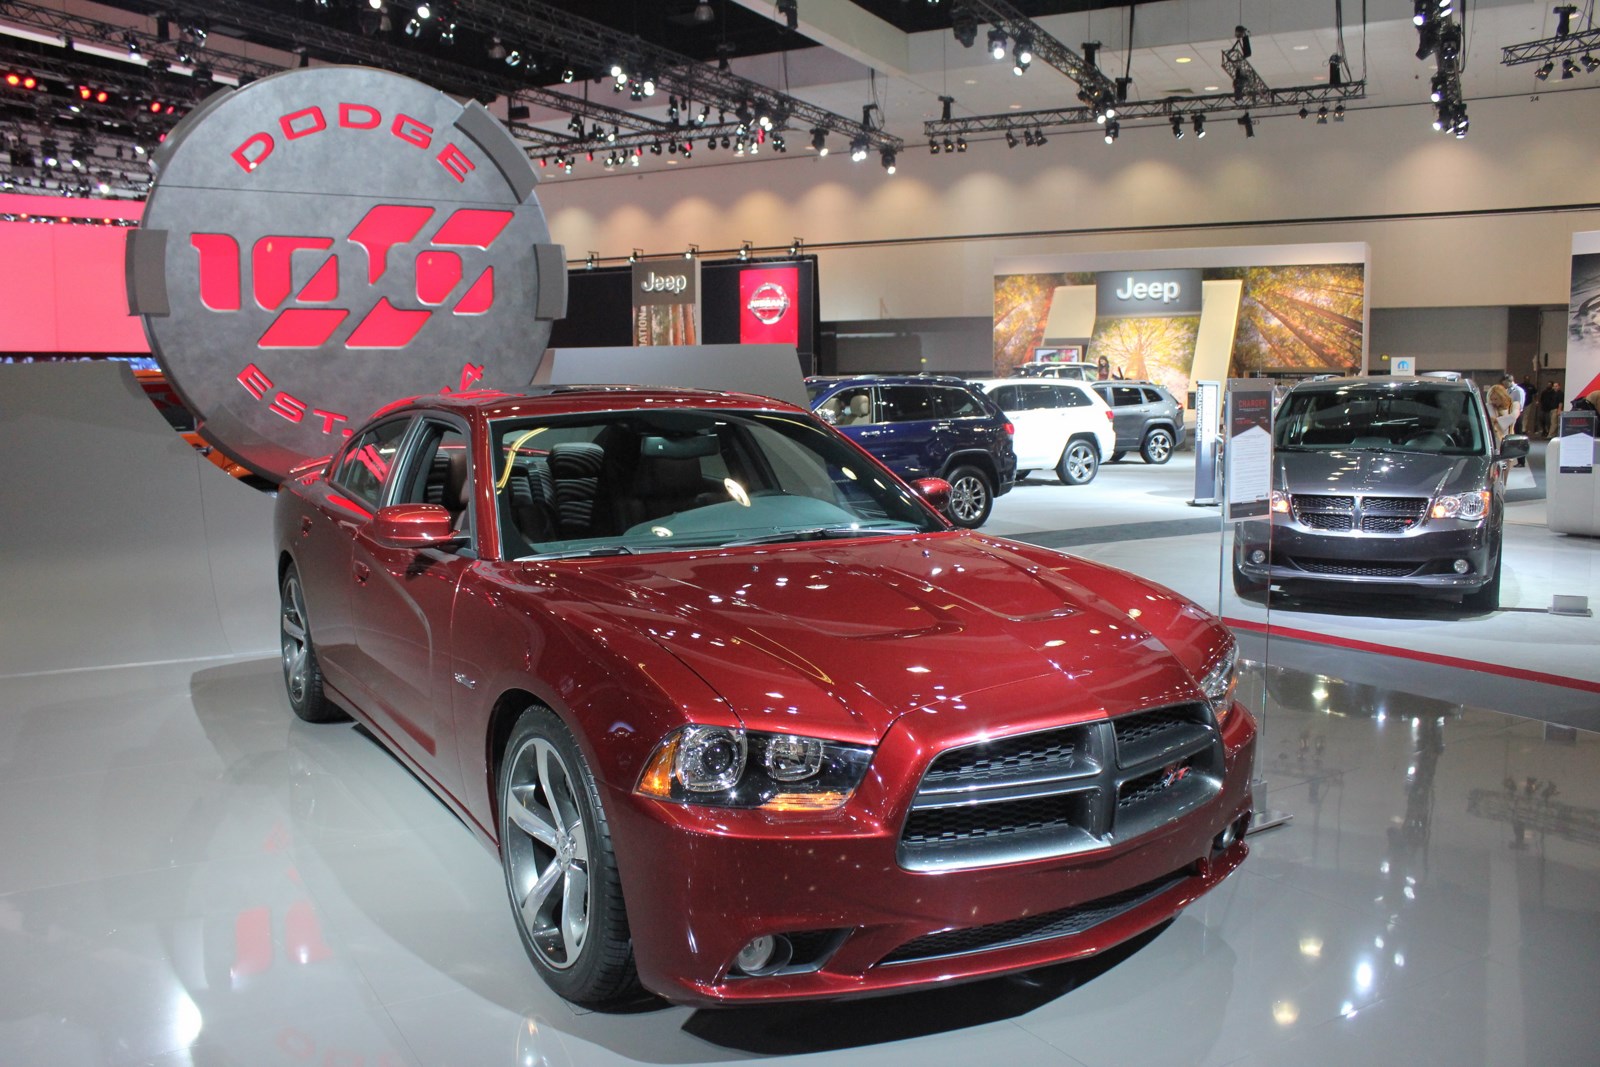 Dodge 100th anniversary charger